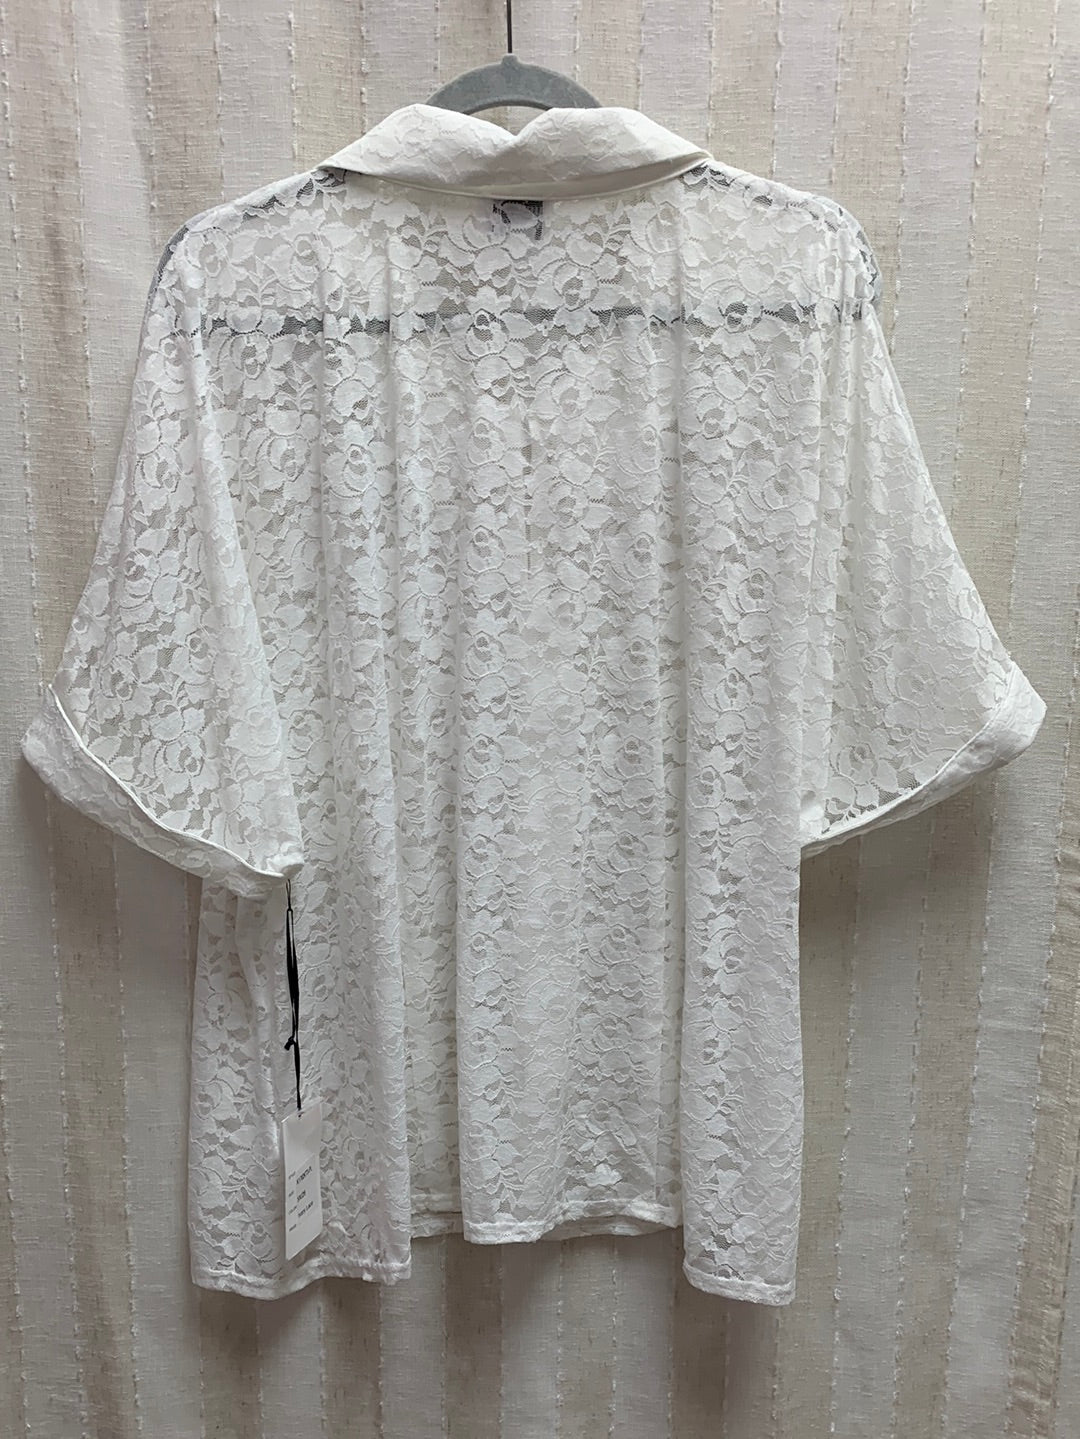 NWT - UNIQUE VINTAGE ivory Short Sleeve Lace Collared Button Blouse - 5X / 26